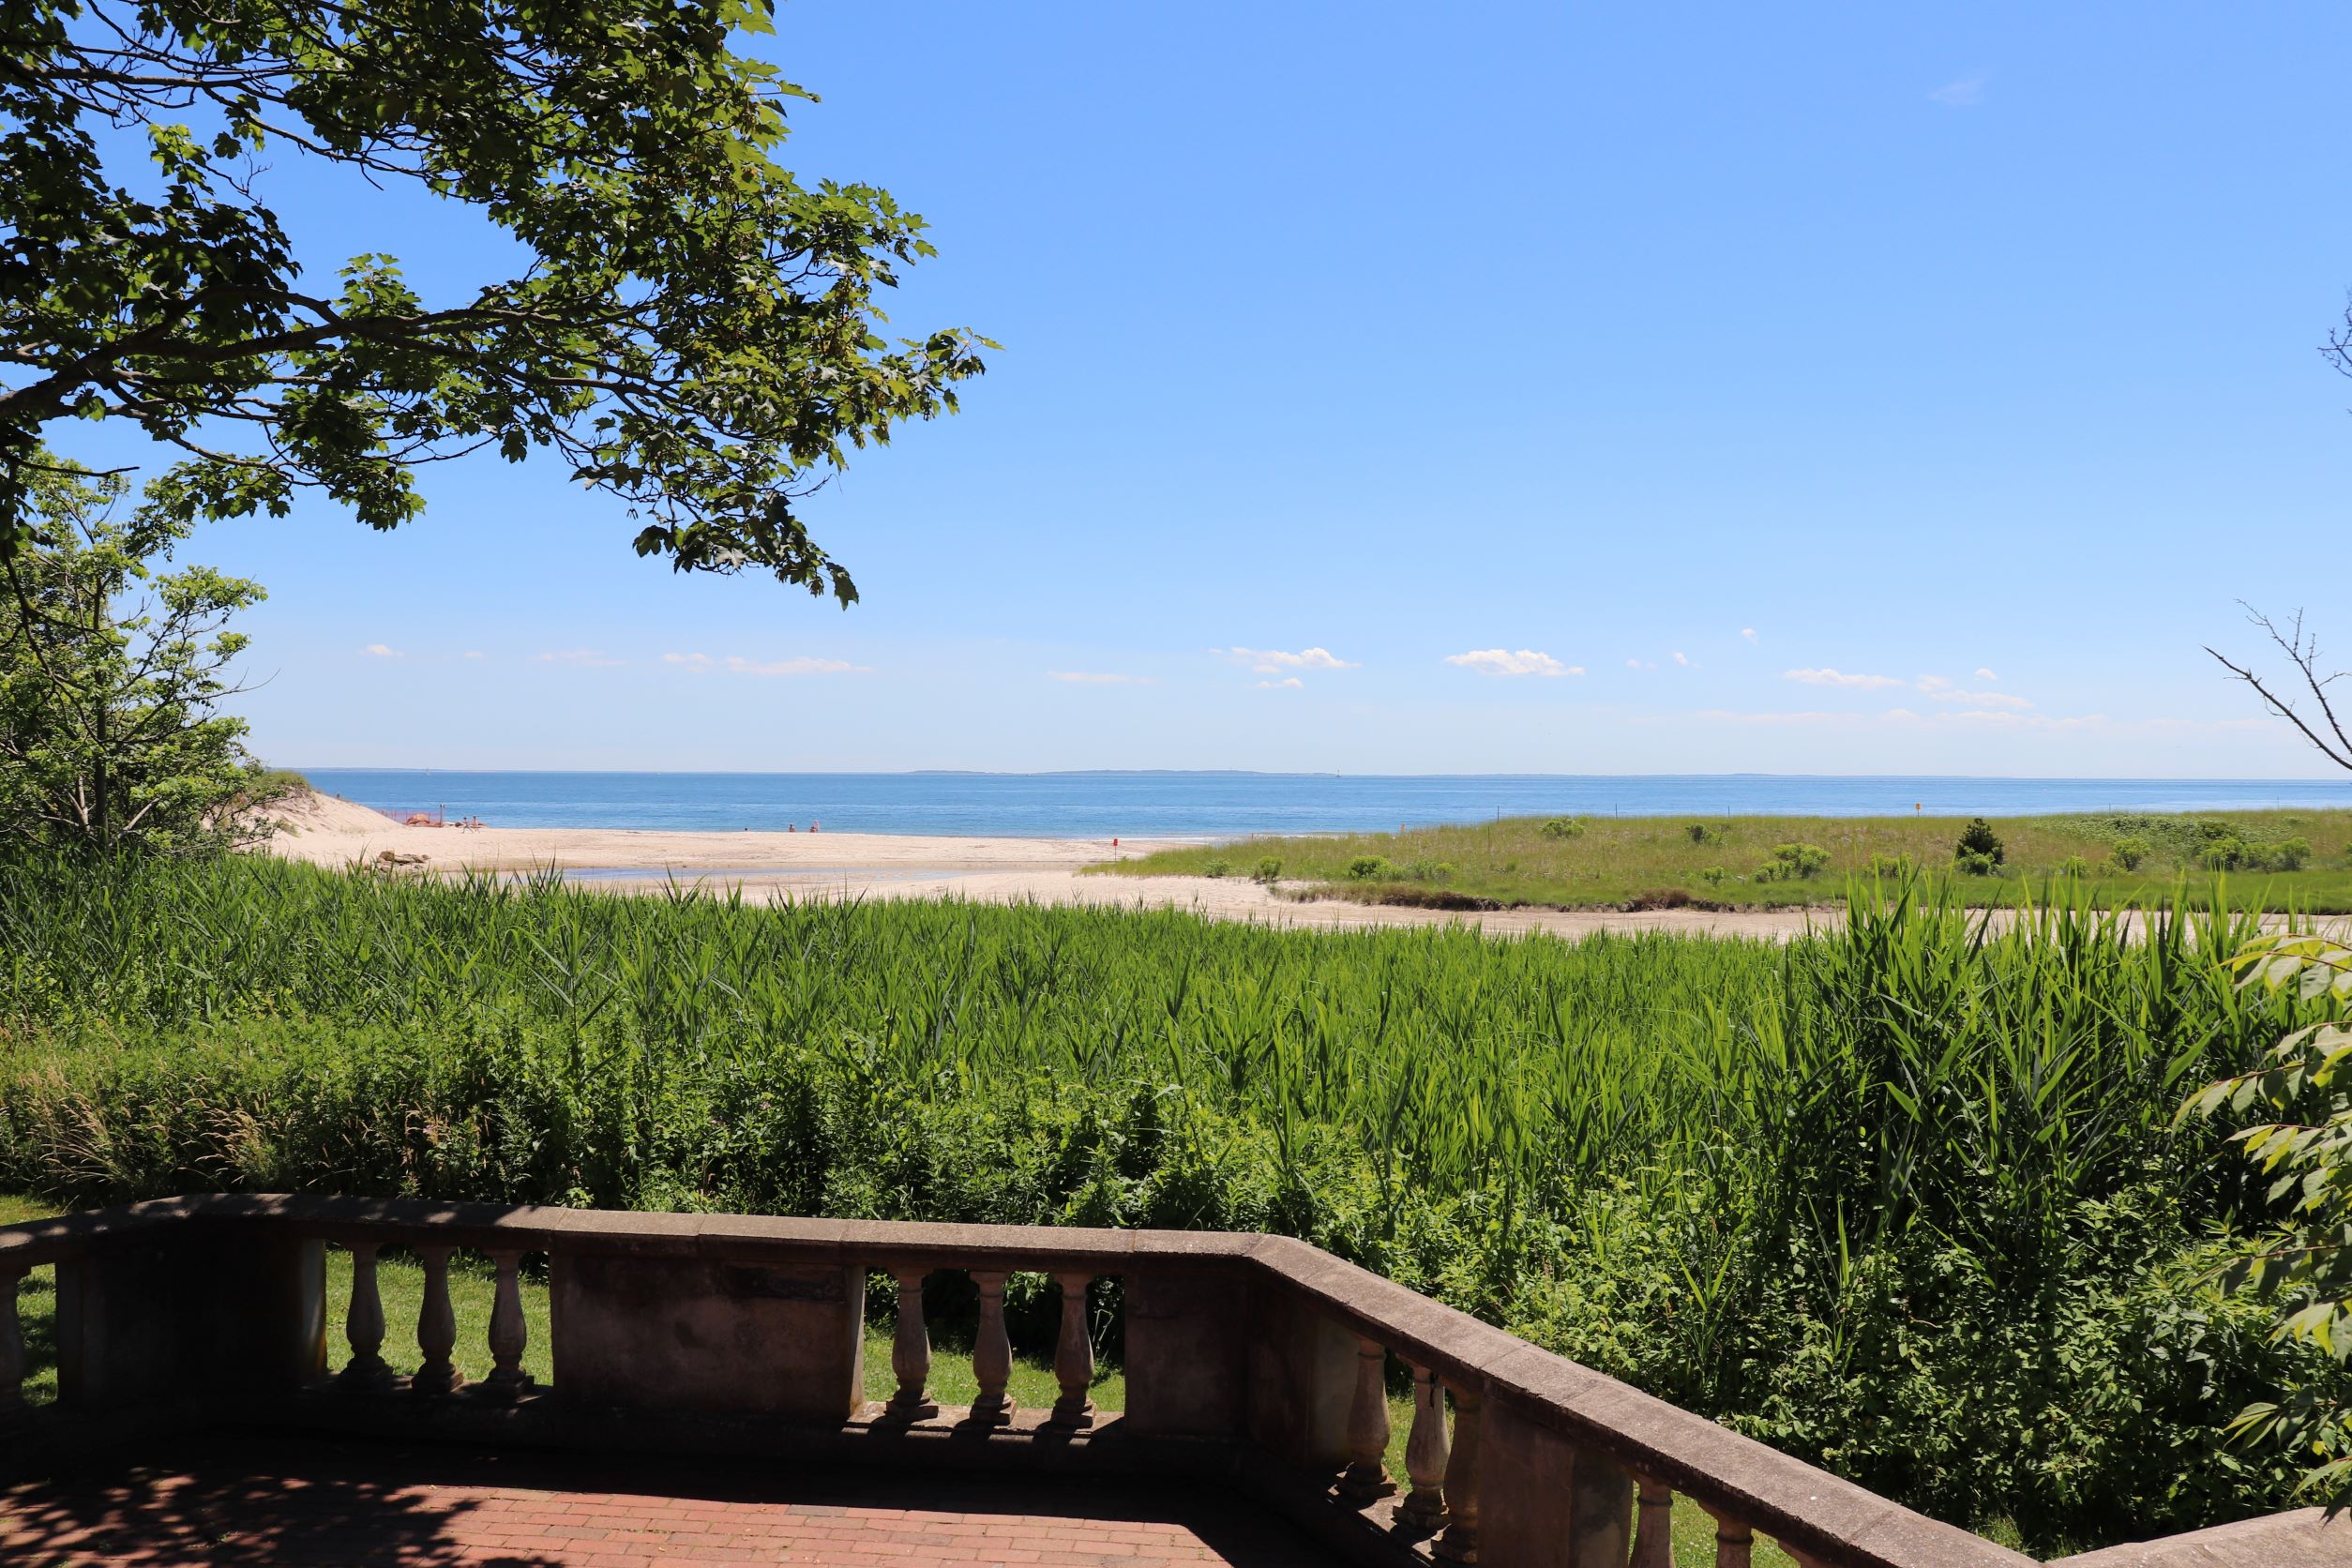 Image from pavilion of beach and dunes at Harkness Park in Waterford Ct.